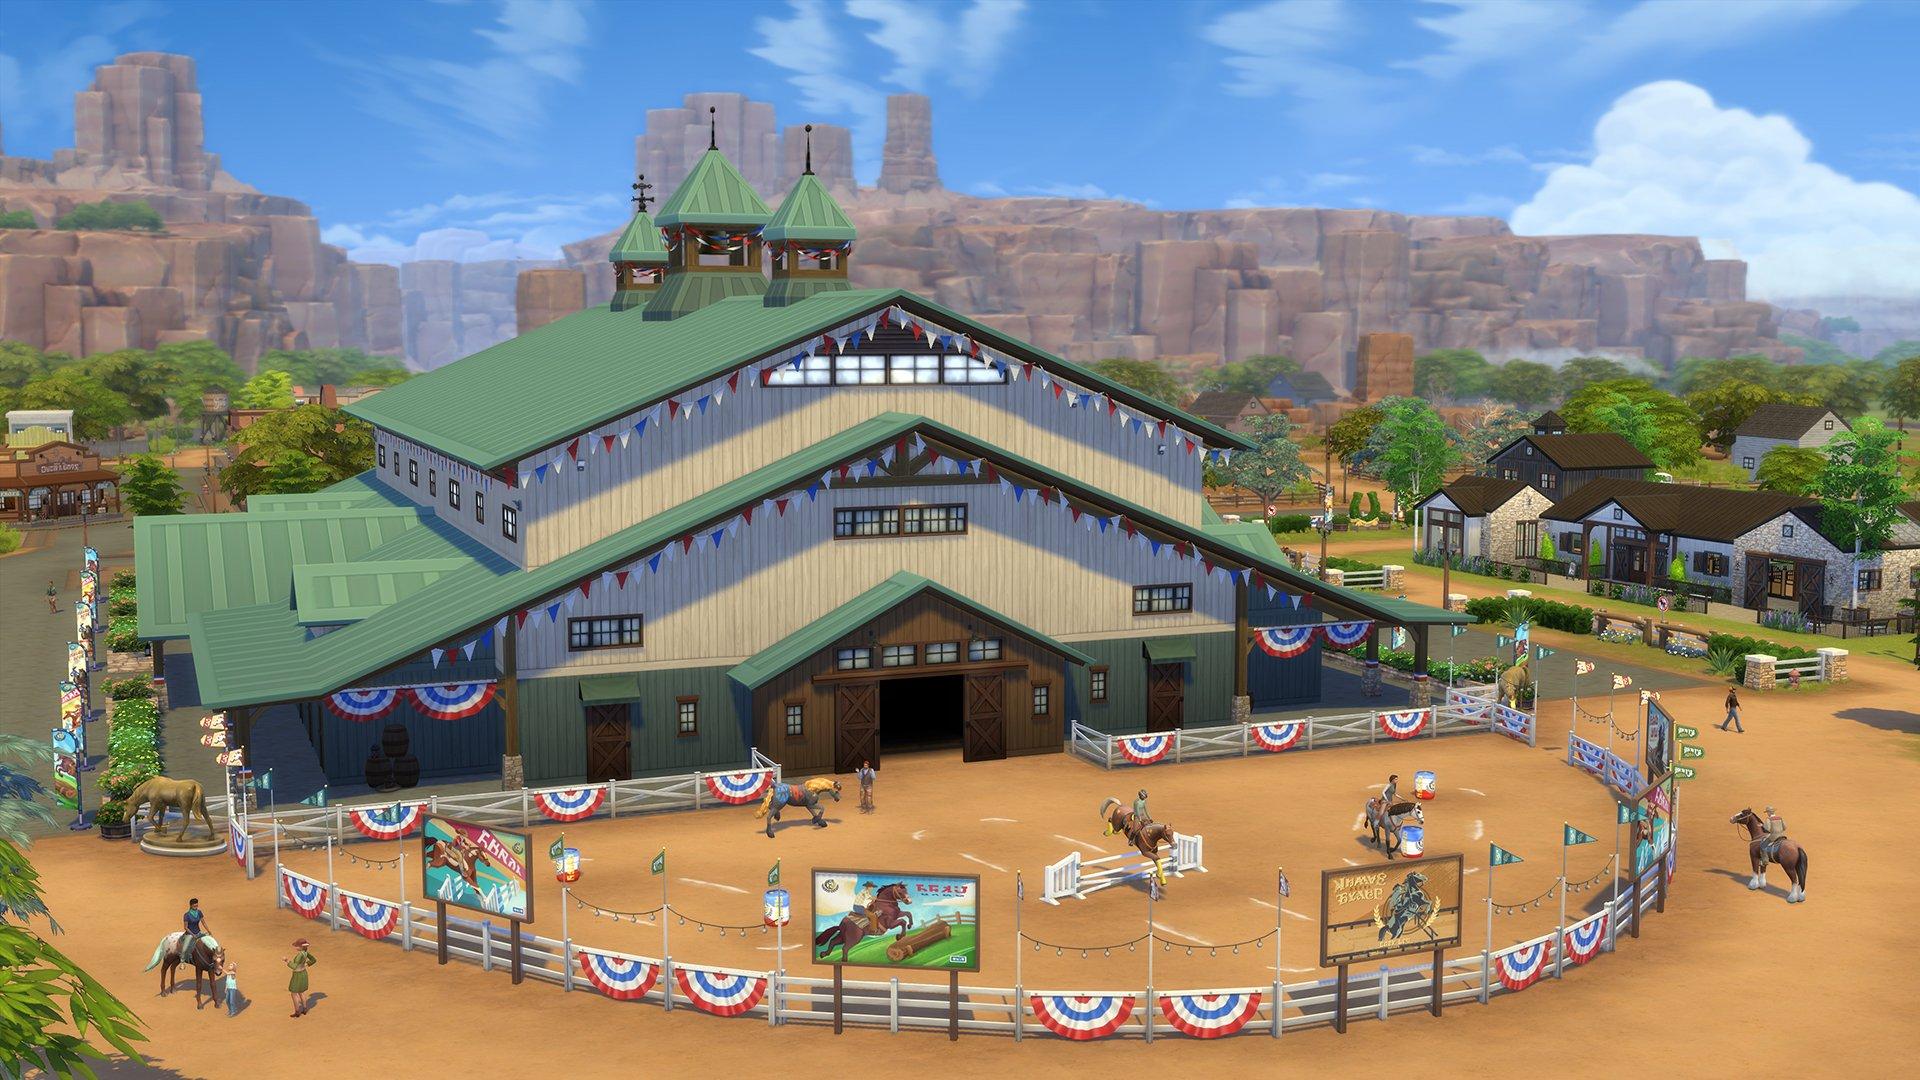 Buy The Sims™ 4 Horse Ranch Expansion Pack